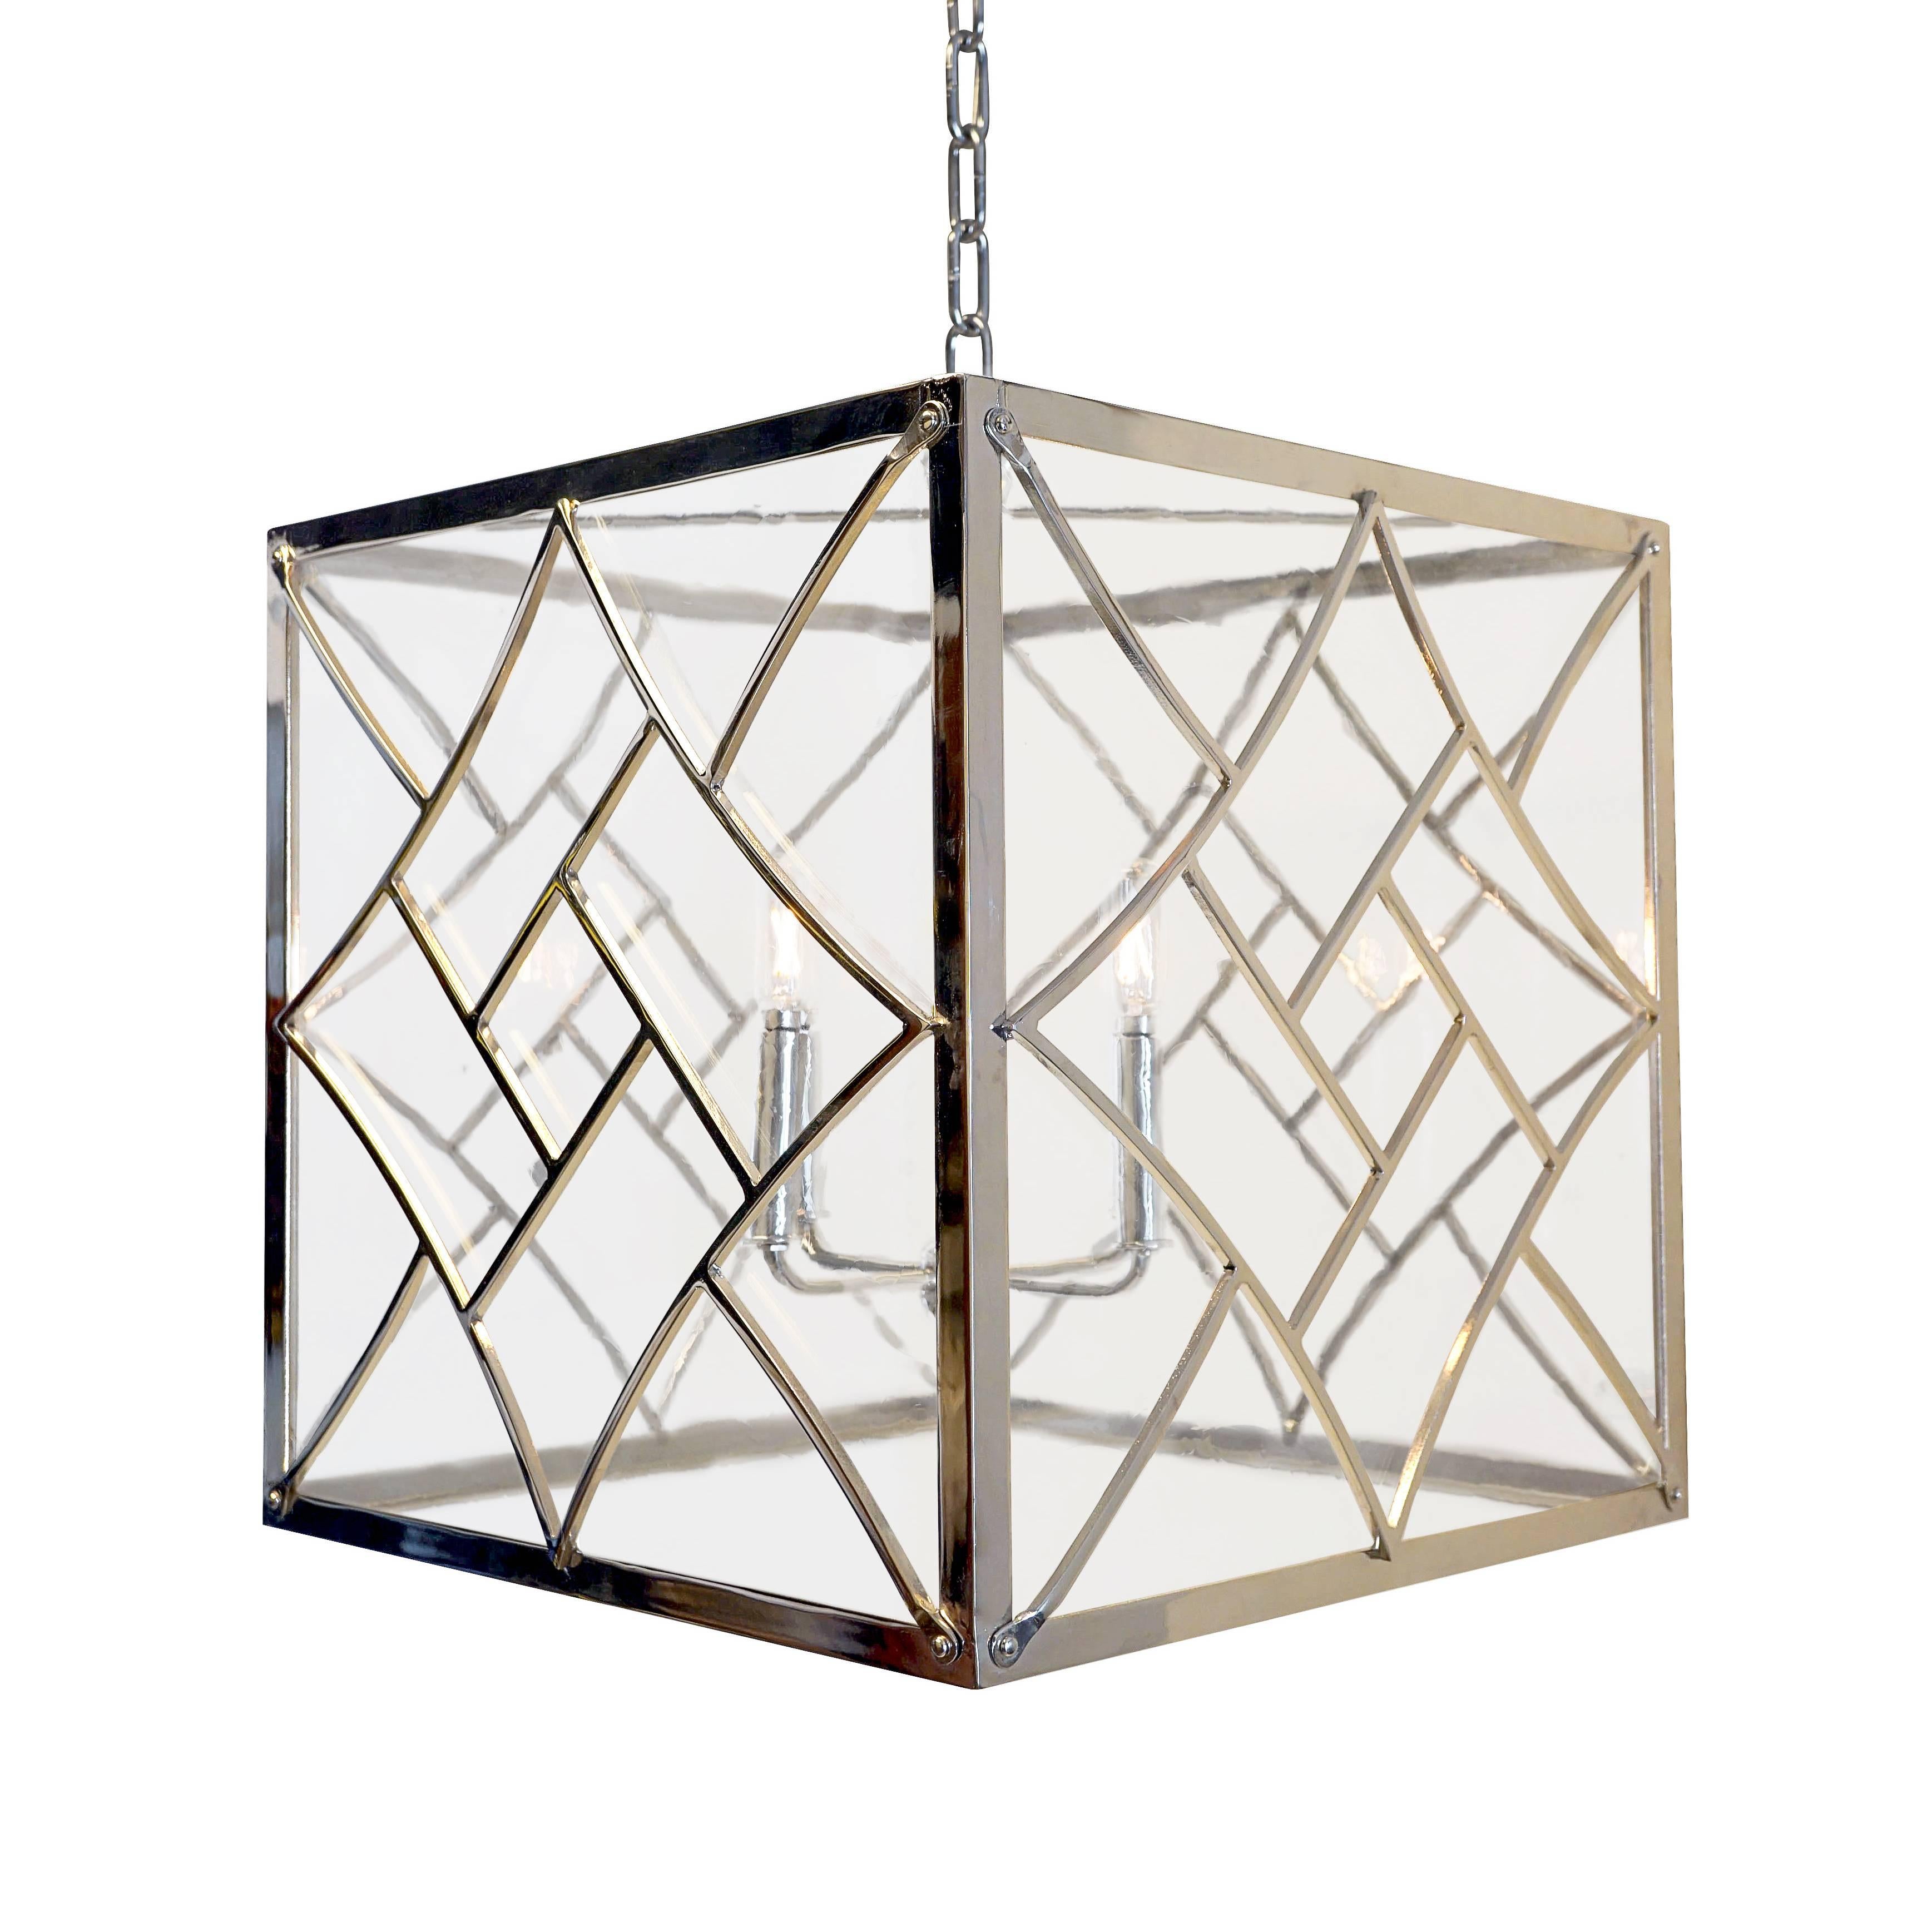 Evoking the Art Deco style of the 1920s and 1930s, our Nouveau cube pendant features bold geometric shapes and a chevron motif. 

Handcrafted in wrought iron. 

3' chain and canopy included in matching finish.
Max wattage: 60, four candelabra